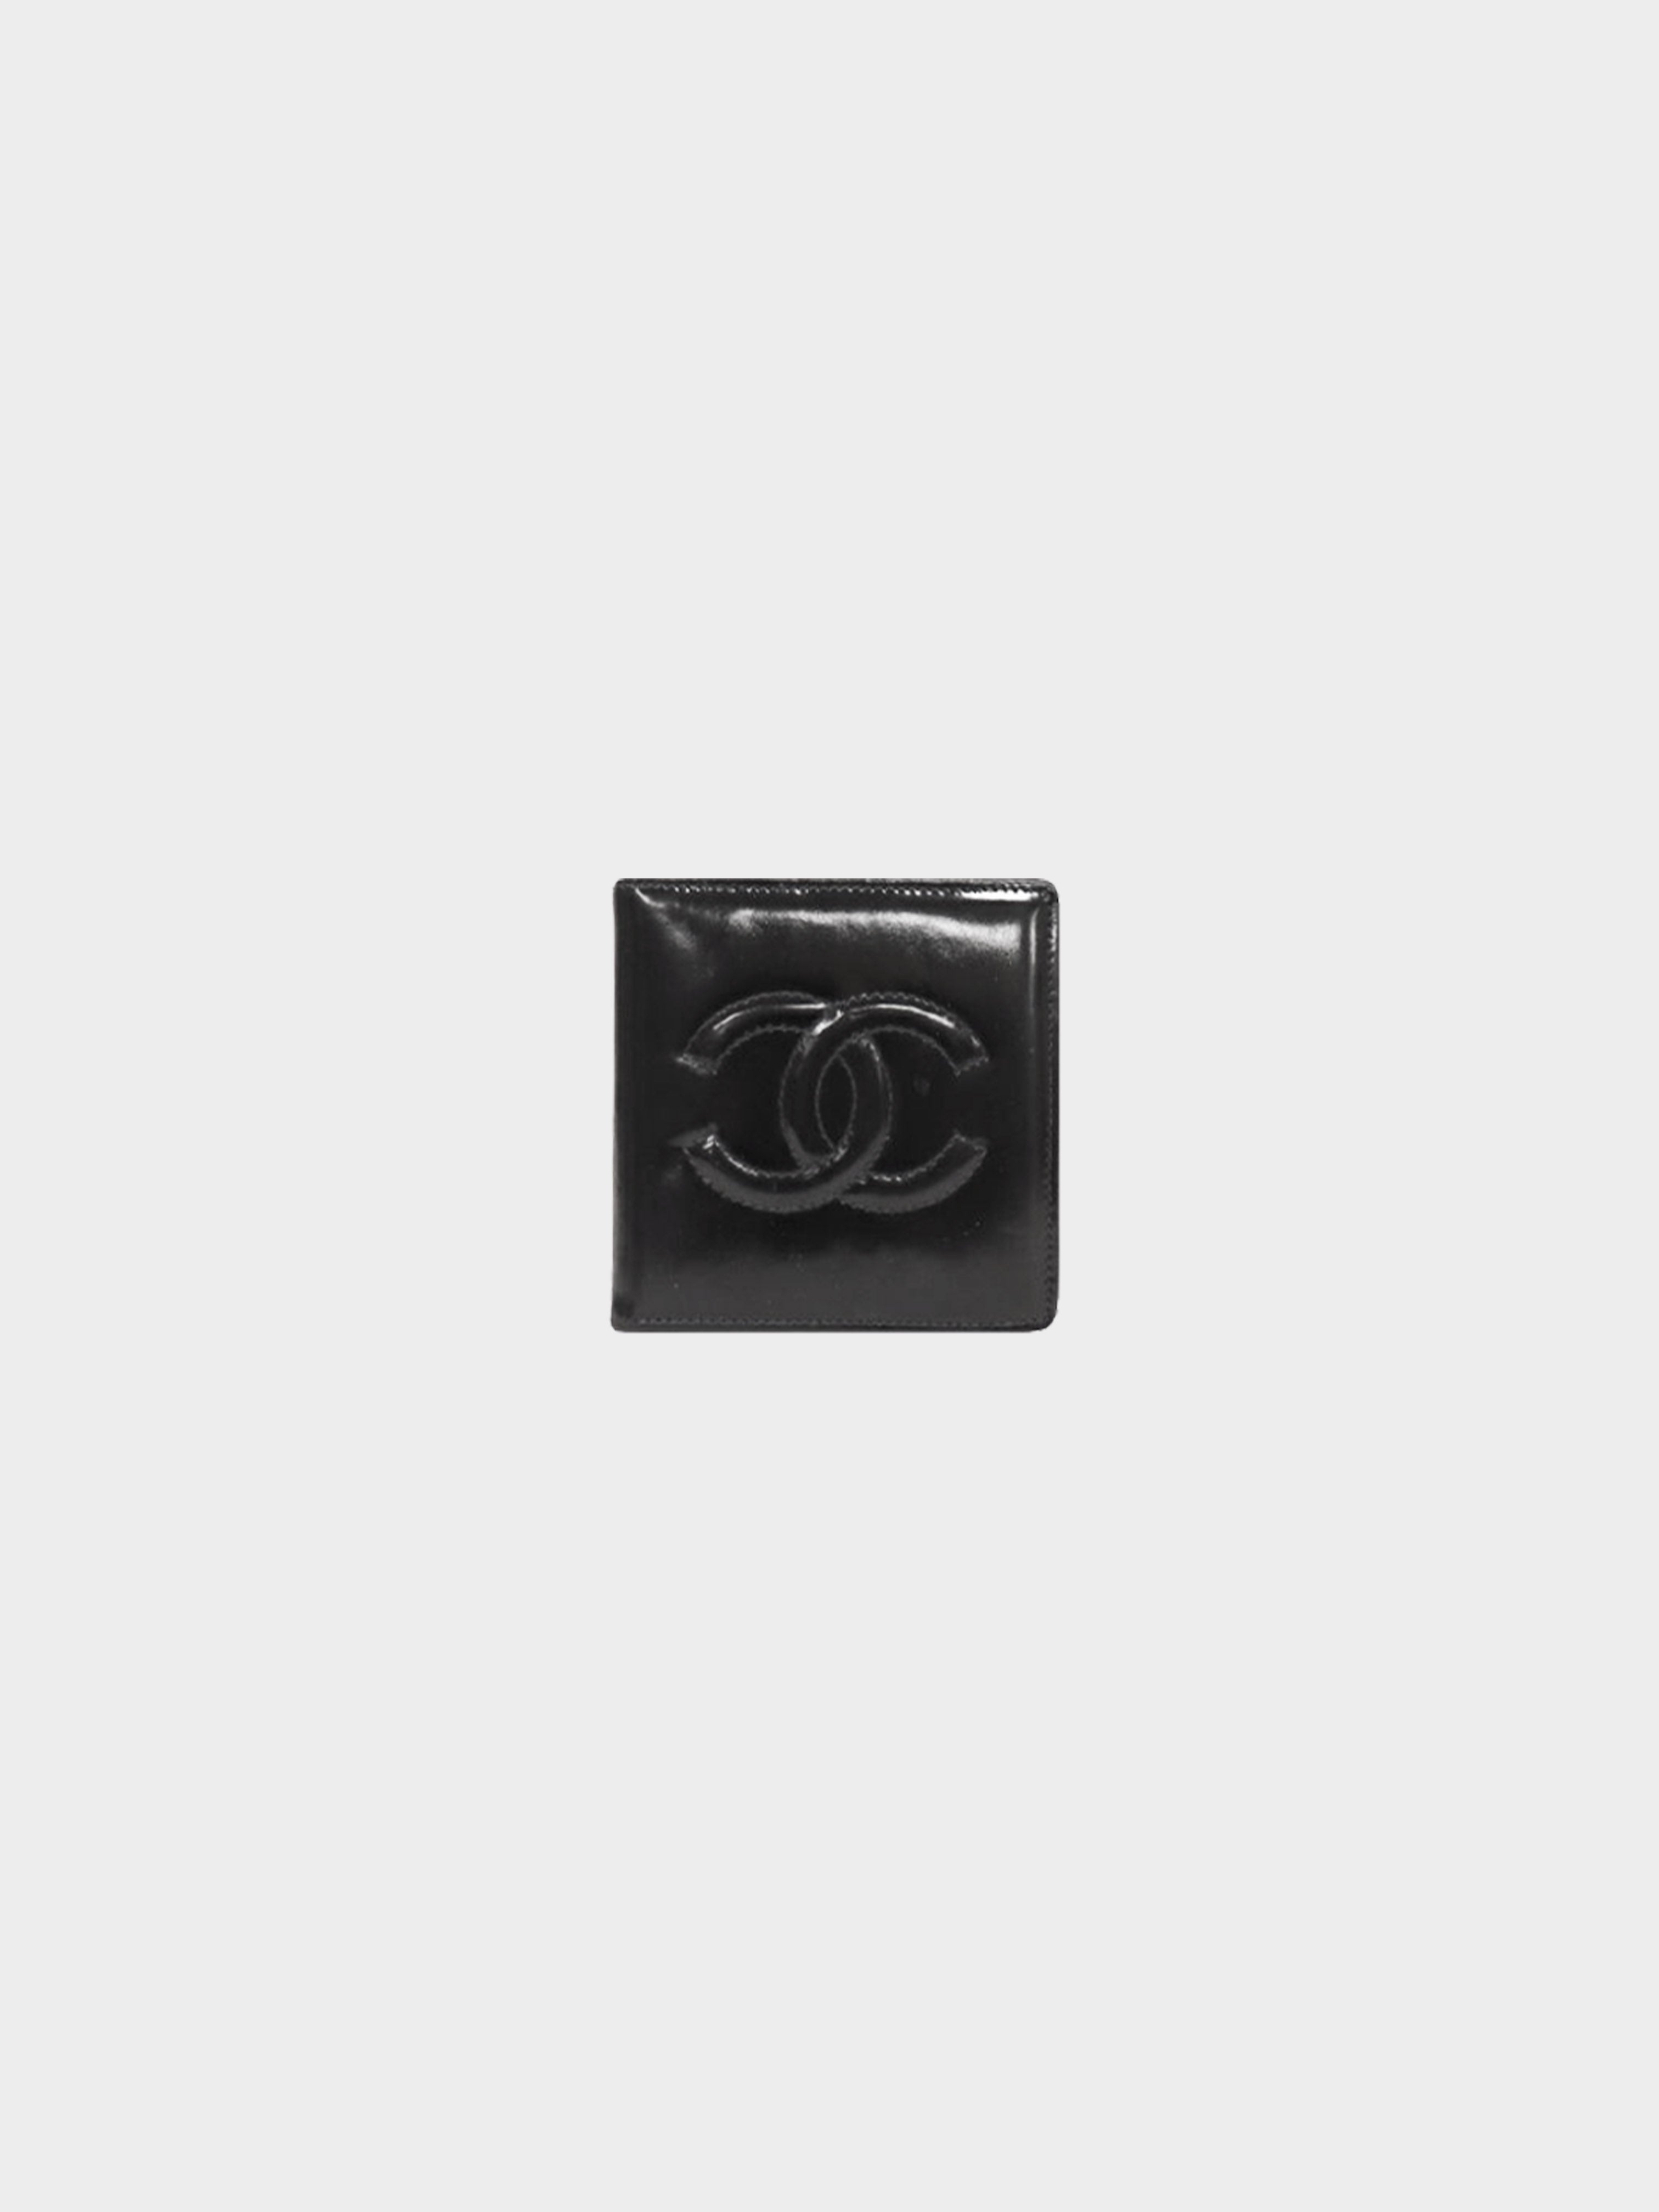 chanel trifold wallet